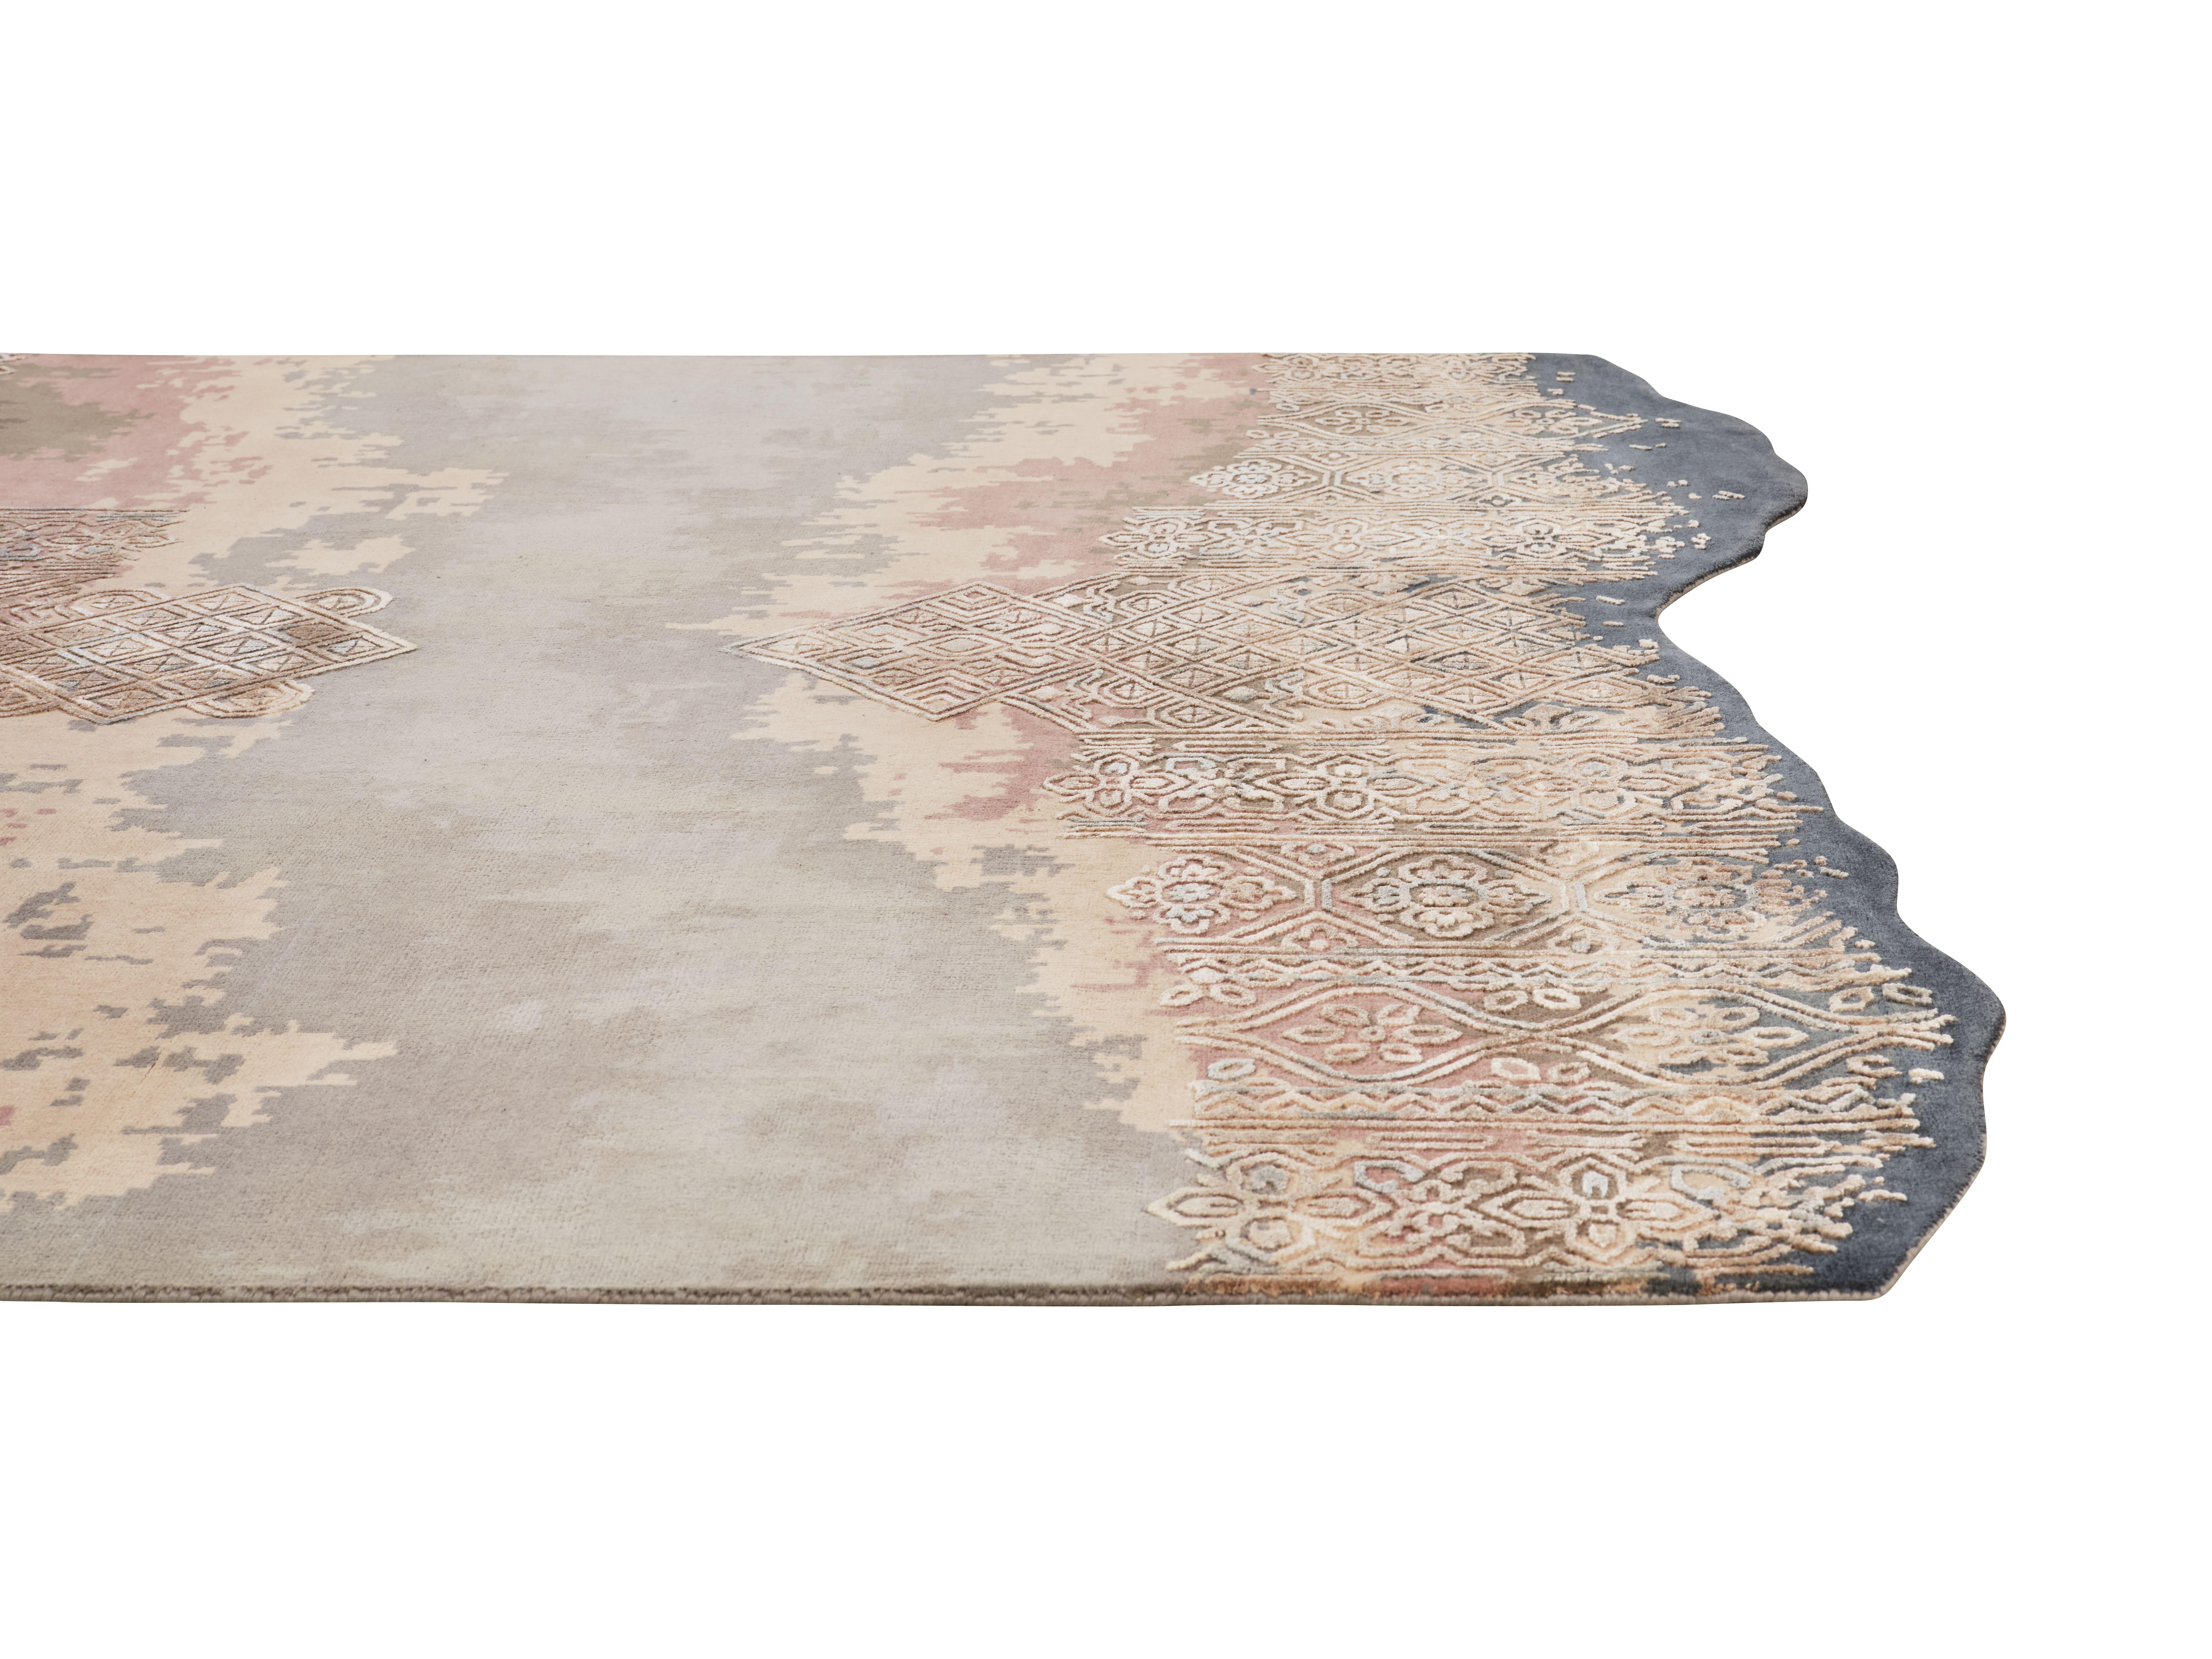 Indian ZIELLE Hand Knotted Transitional Shaped Pastel Colour Rug with Motifs by Hands For Sale